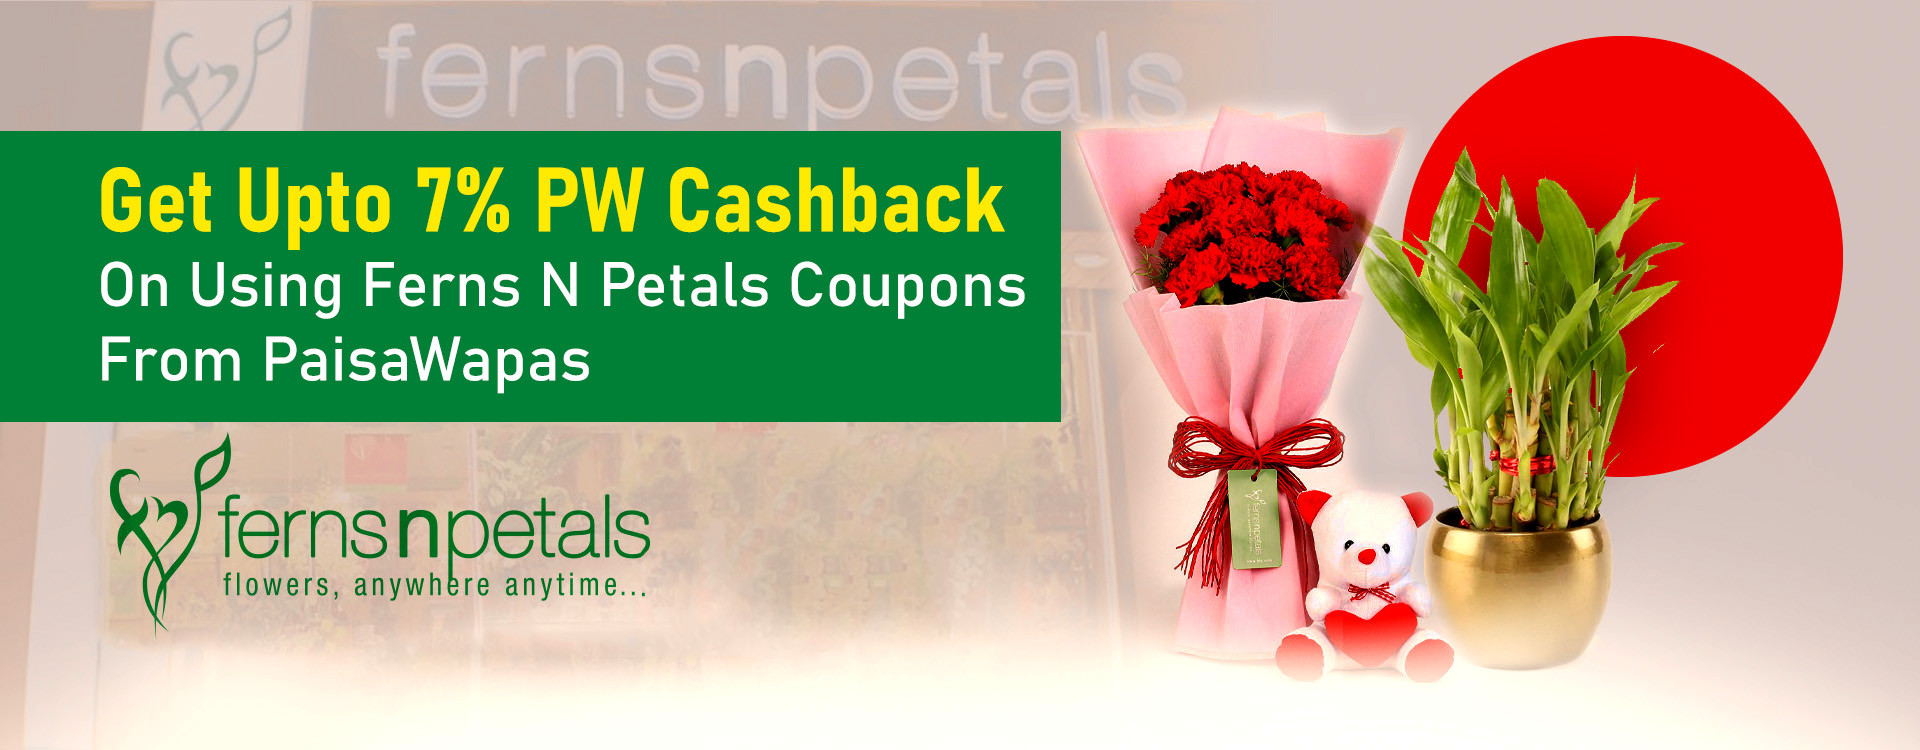 Ferns And Petals Coupons